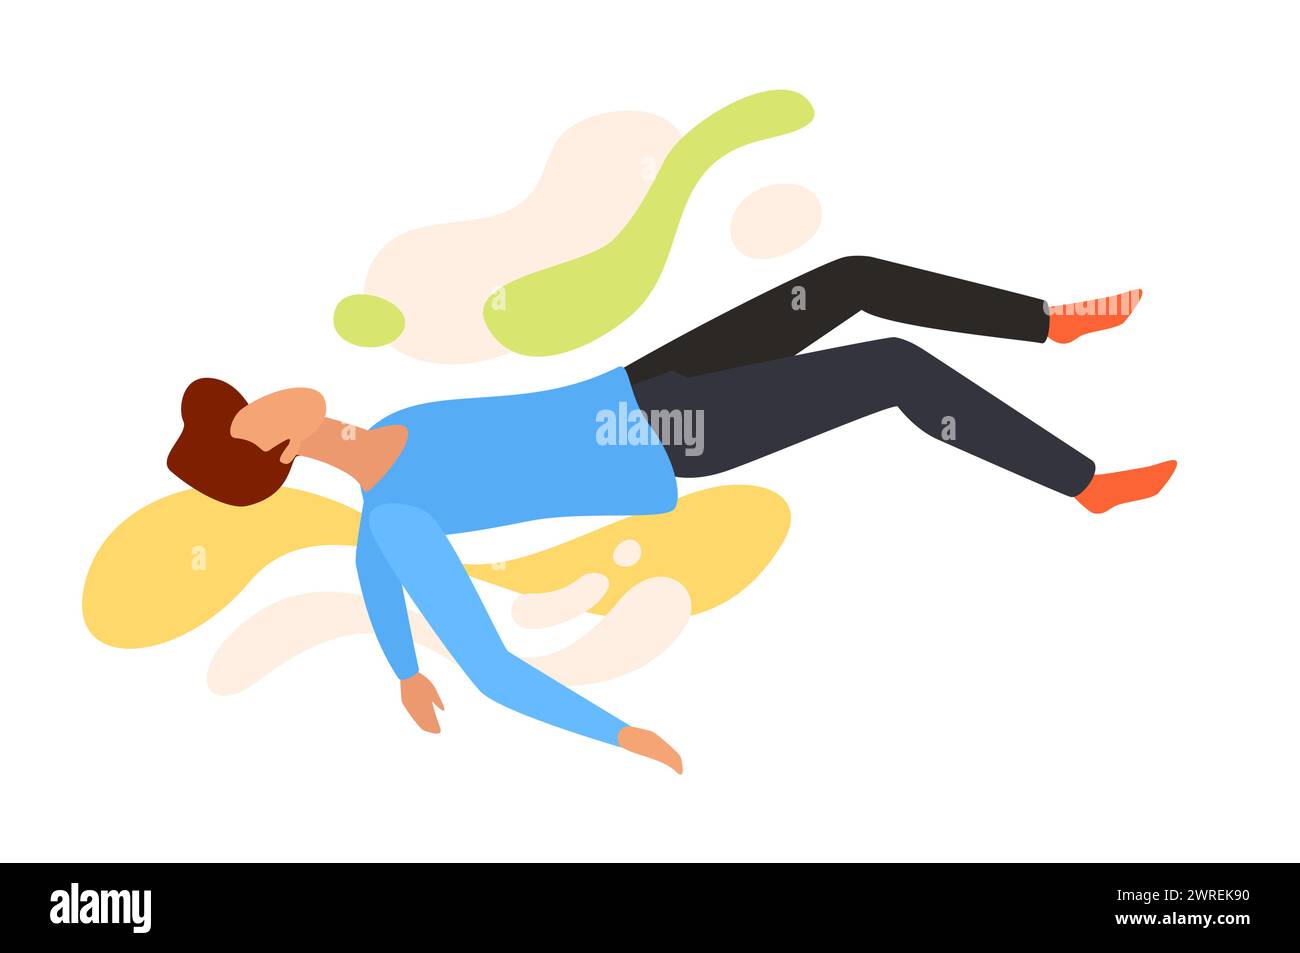 Free man flying and levitating in dreams, freedom and fantasy space vector illustration Stock Vector